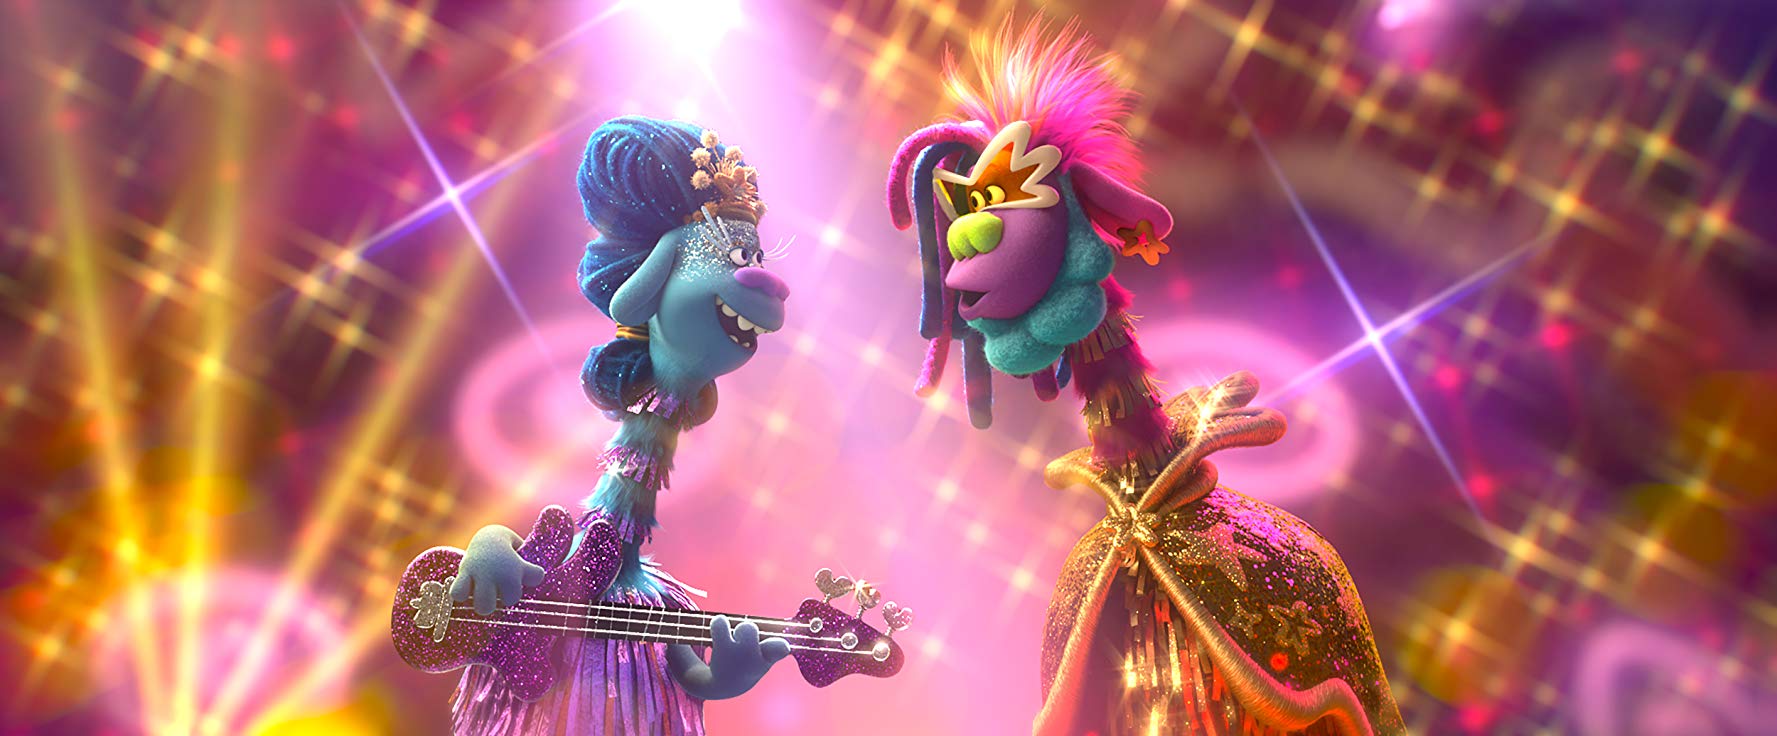 trolls 2 - Trolls 2 New Trailer is Here and its All Kinds of Music Except Afro Beats!